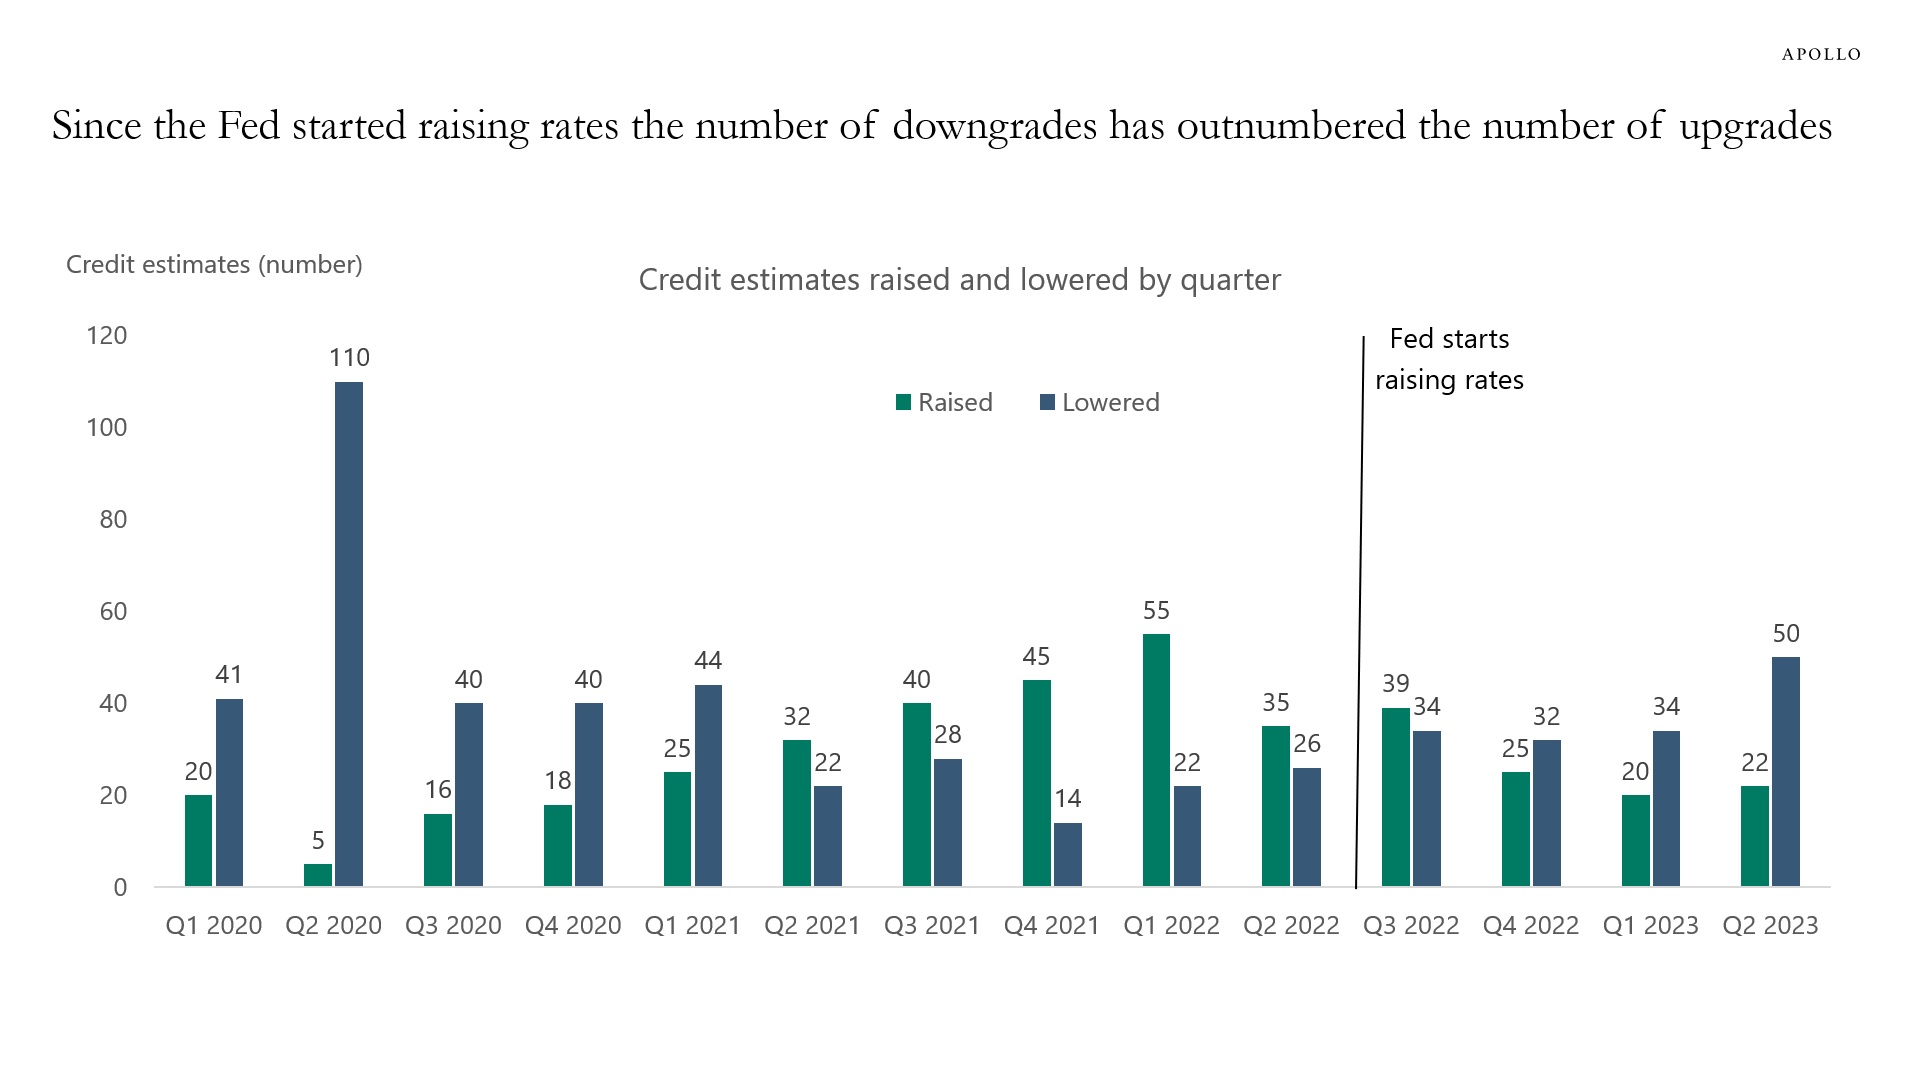 Credit downgrades are vastly outpacing upgrades. 